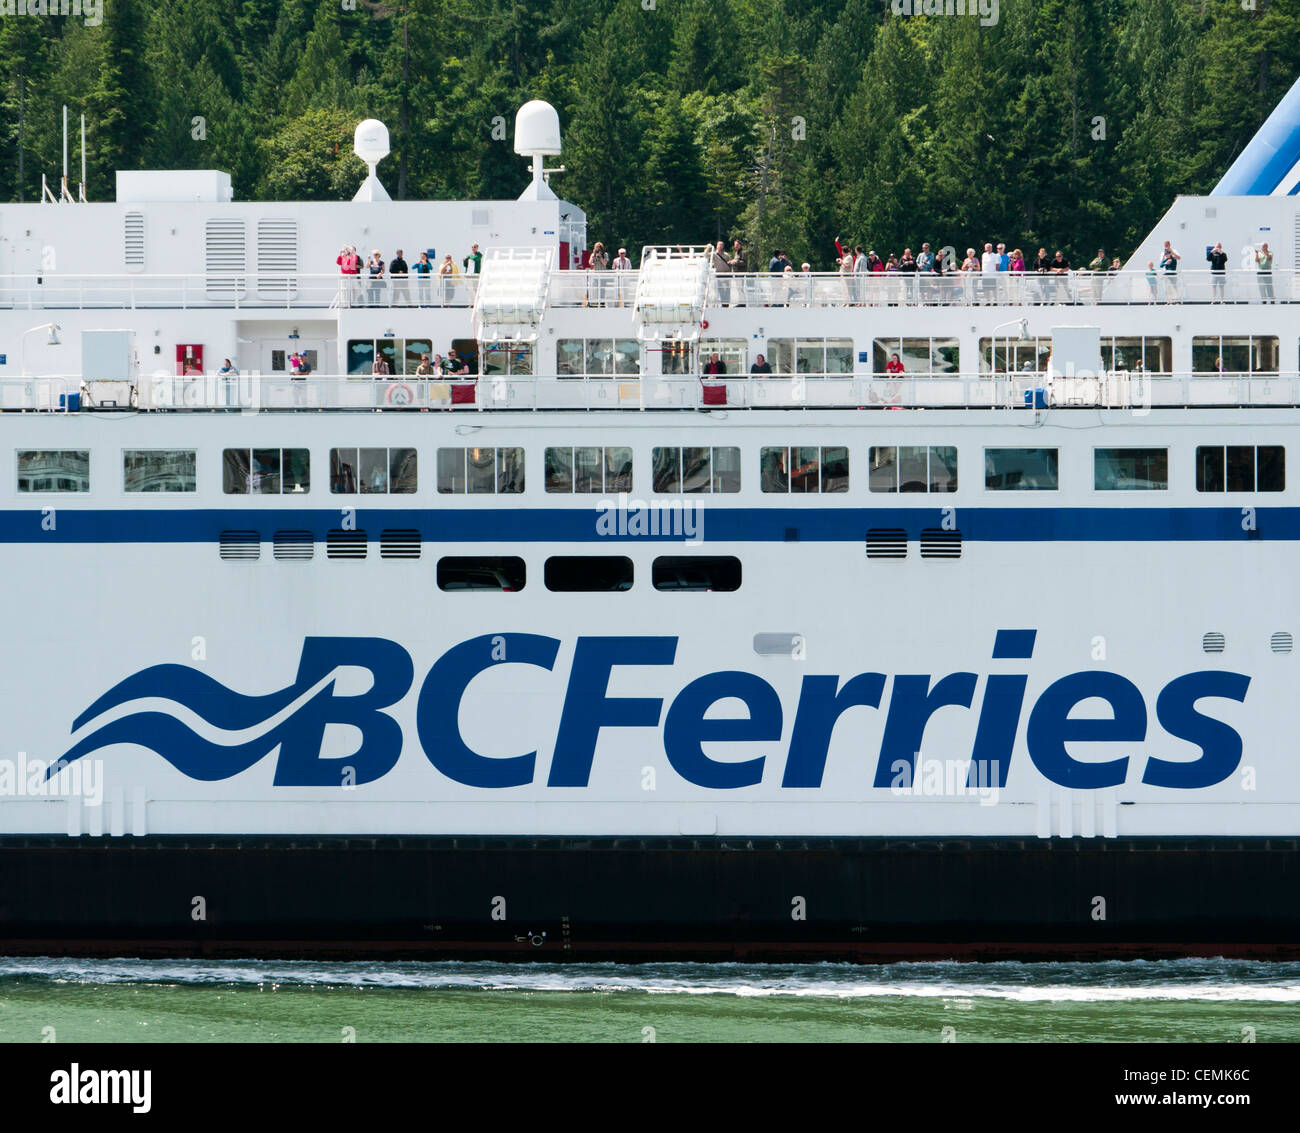 A BC Ferries ferry which serves the Islands off the coast of Vancouver in Canada Stock Photo